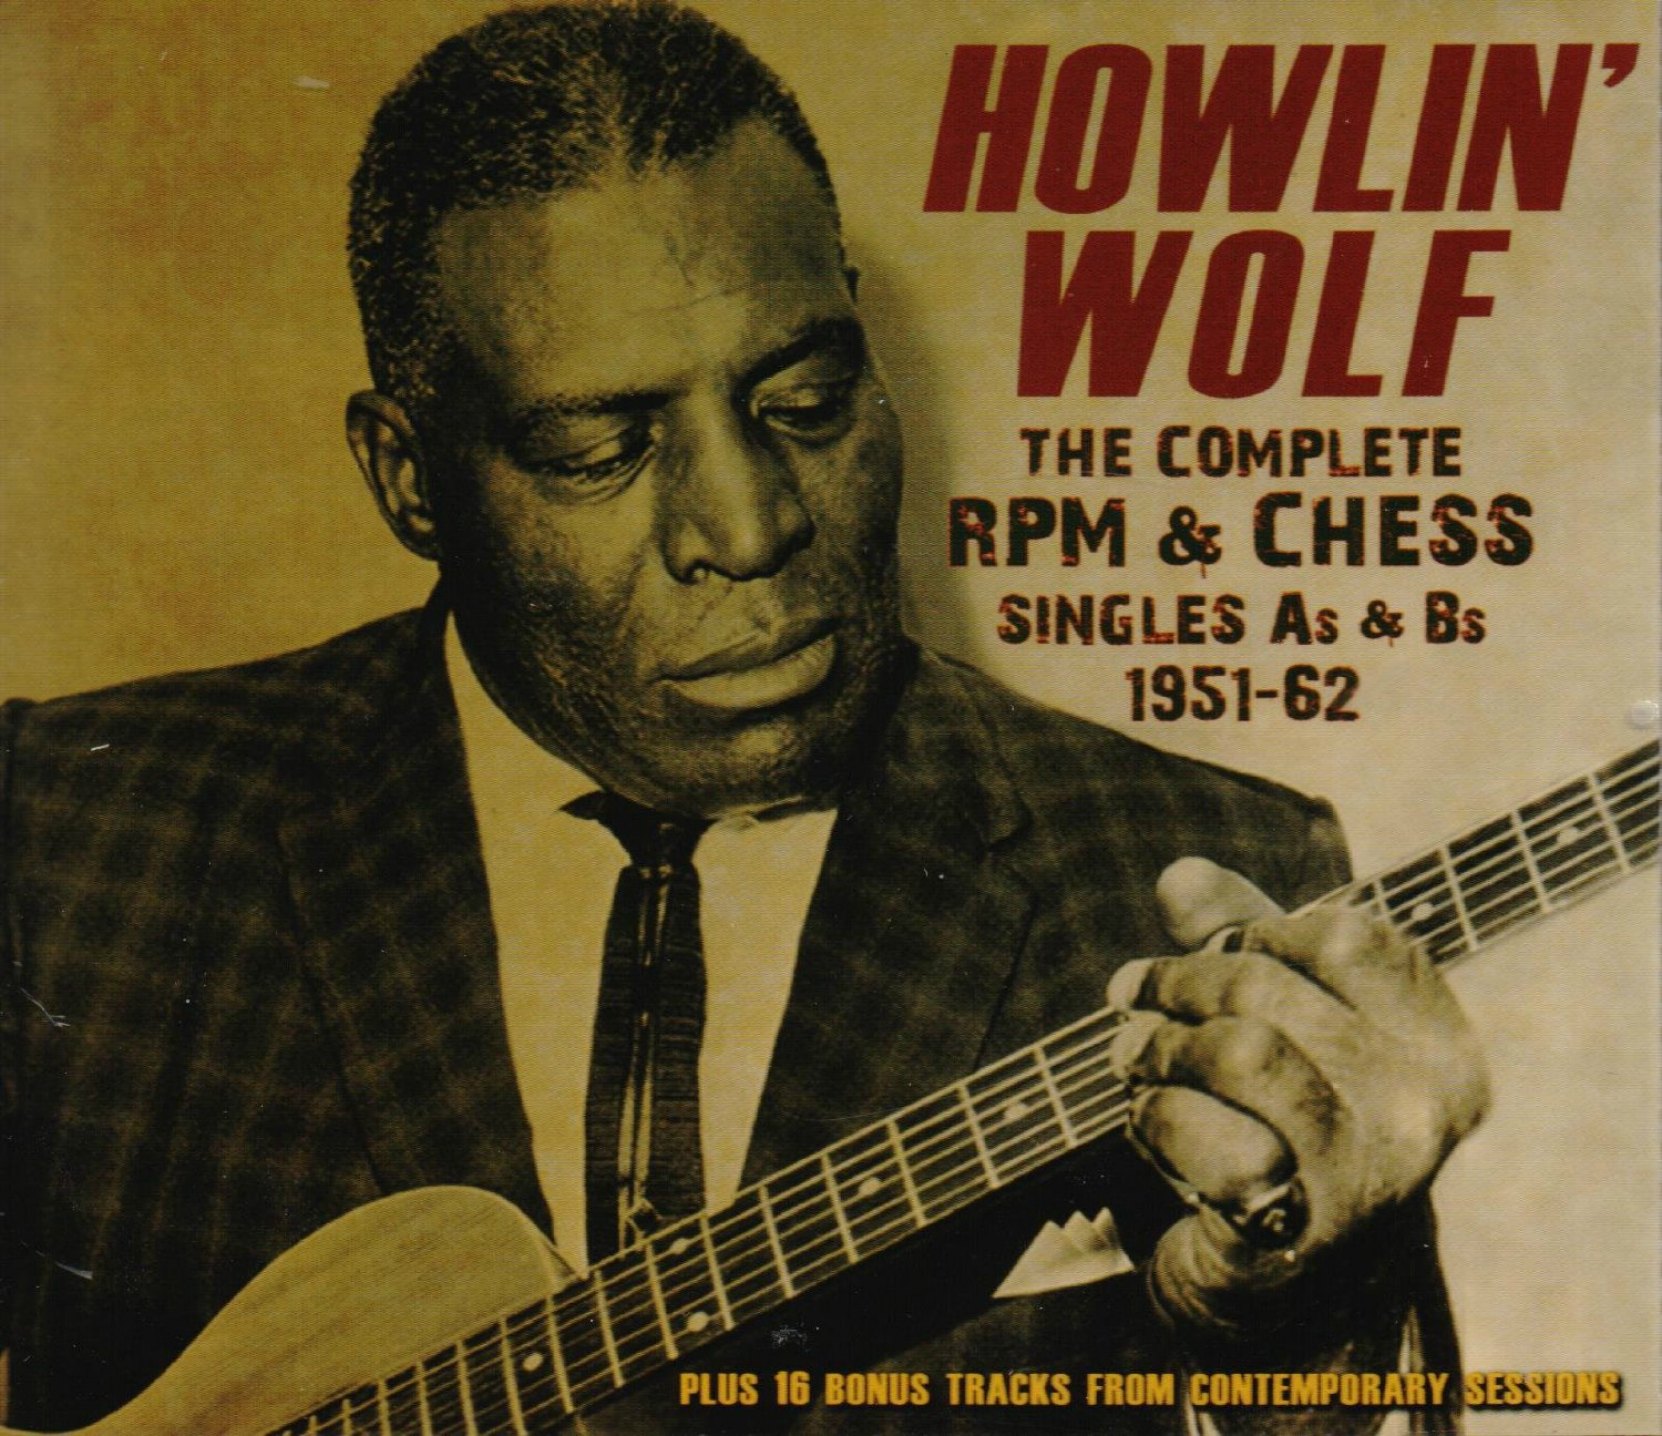 CD cover, Howlin' Wolf, The Complete RPM & Chess Singles As & Bs 1951-62, on Acrobat Records